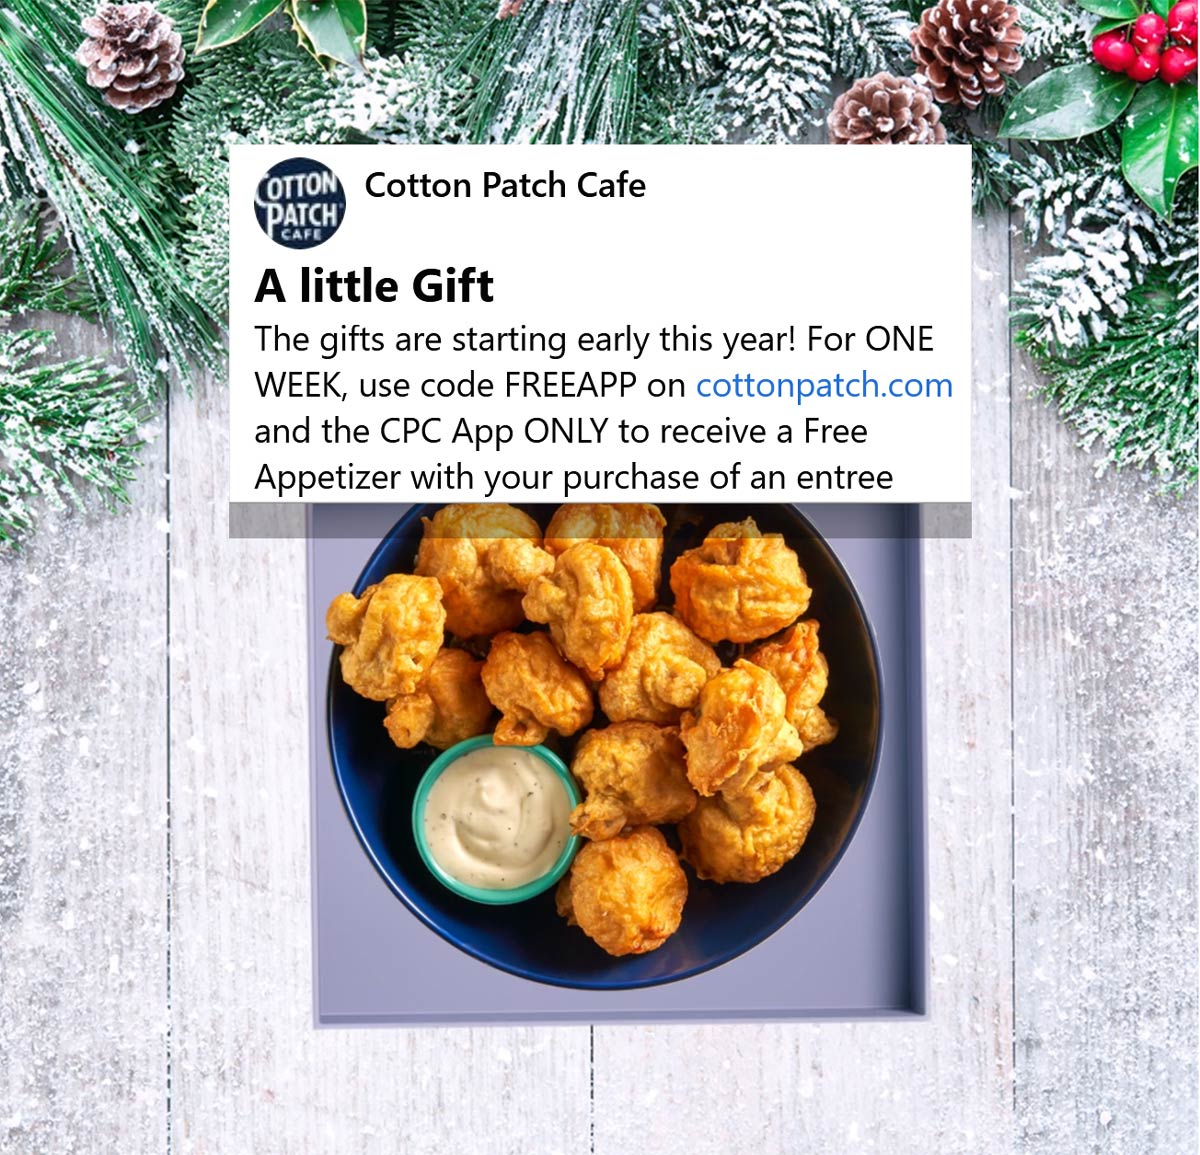 Cotton Patch Cafe coupons & promo code for [December 2022]